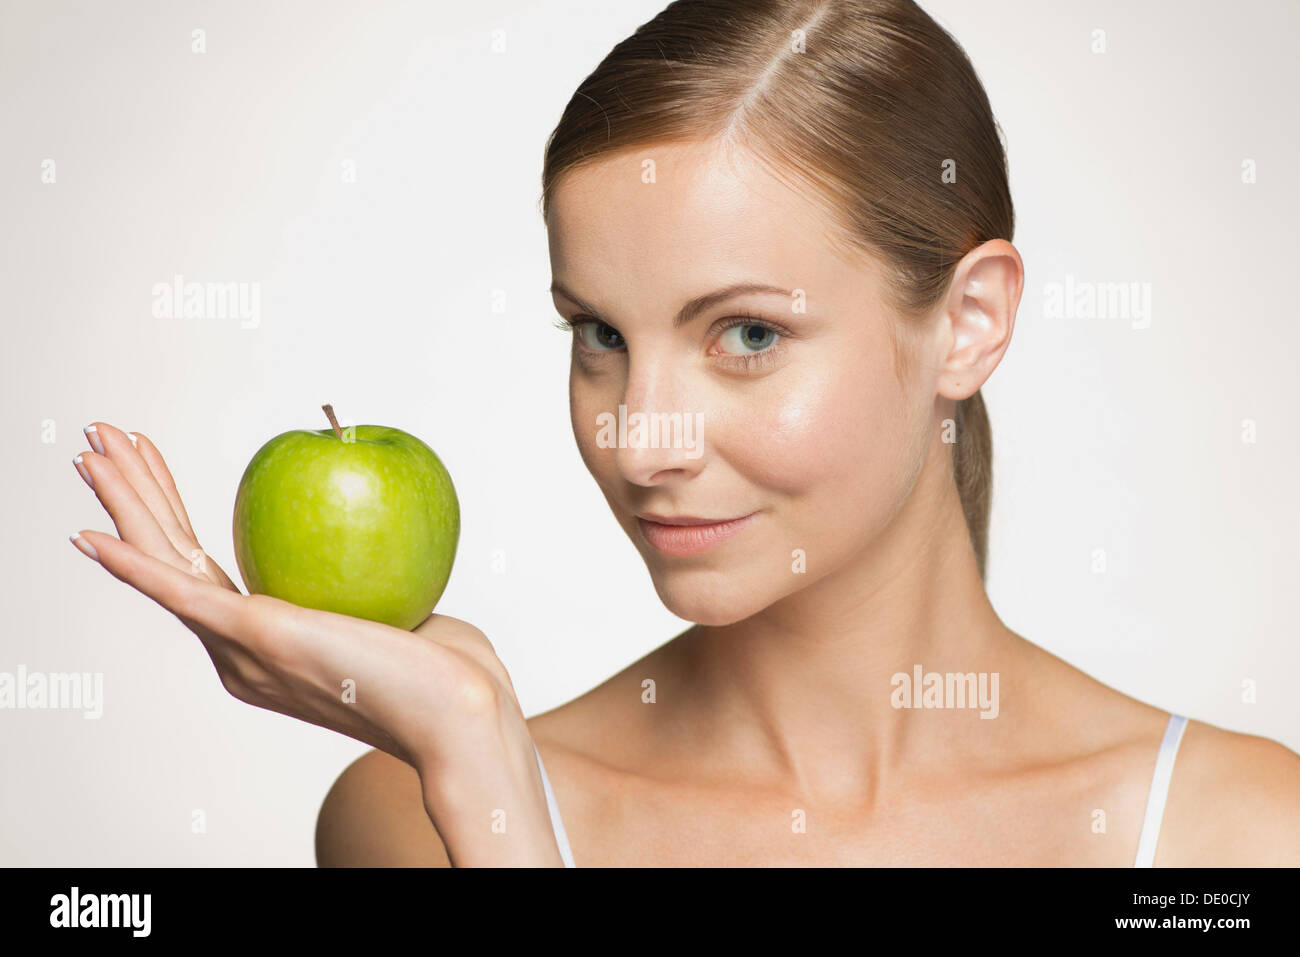 Young woman holding green apple Stock Photo